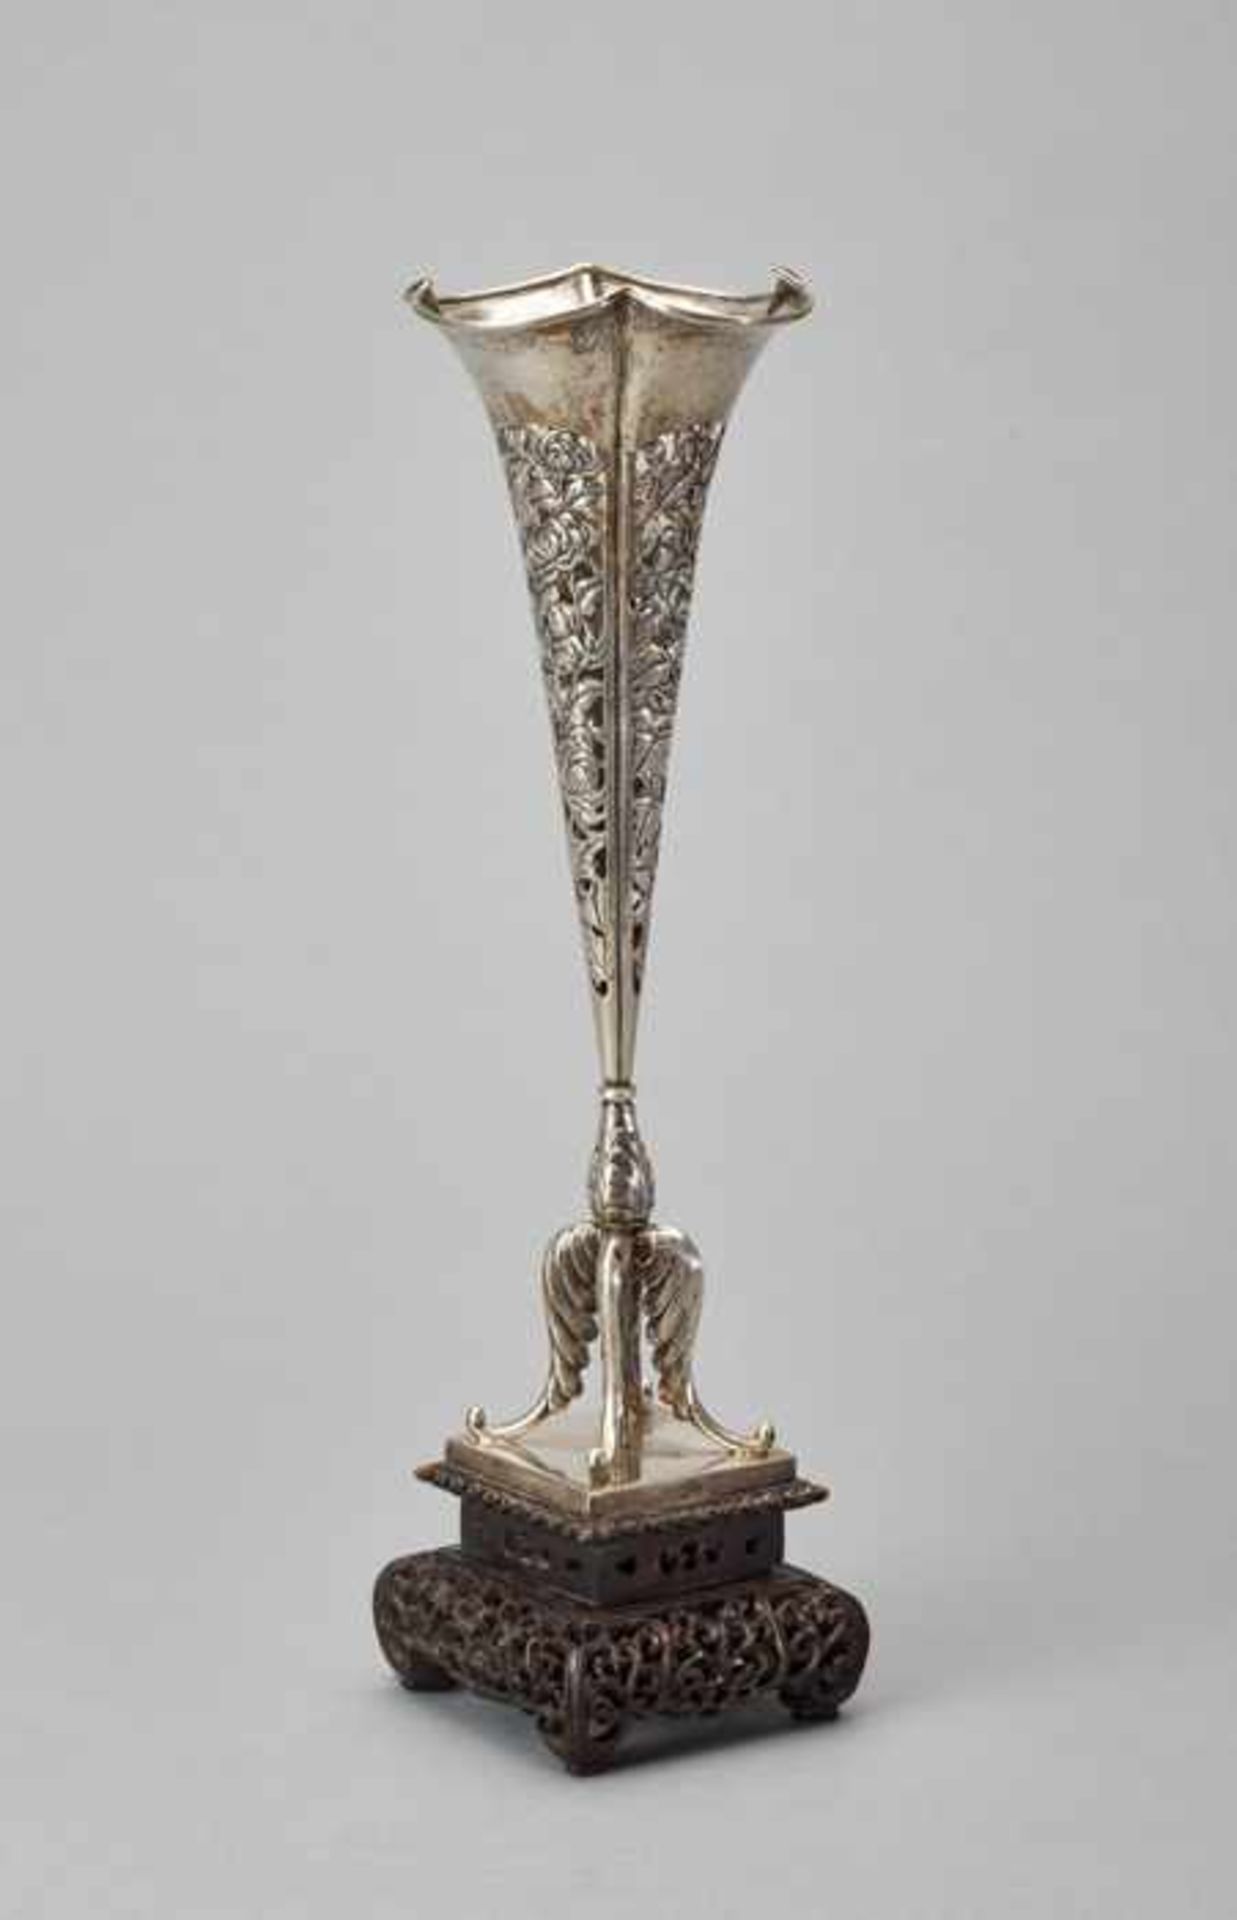 A WO SHING EXPORT SILVER TRUMPET VASE WITH DRAGON, 1880s Silver with chase work and reticulation, - Image 4 of 5